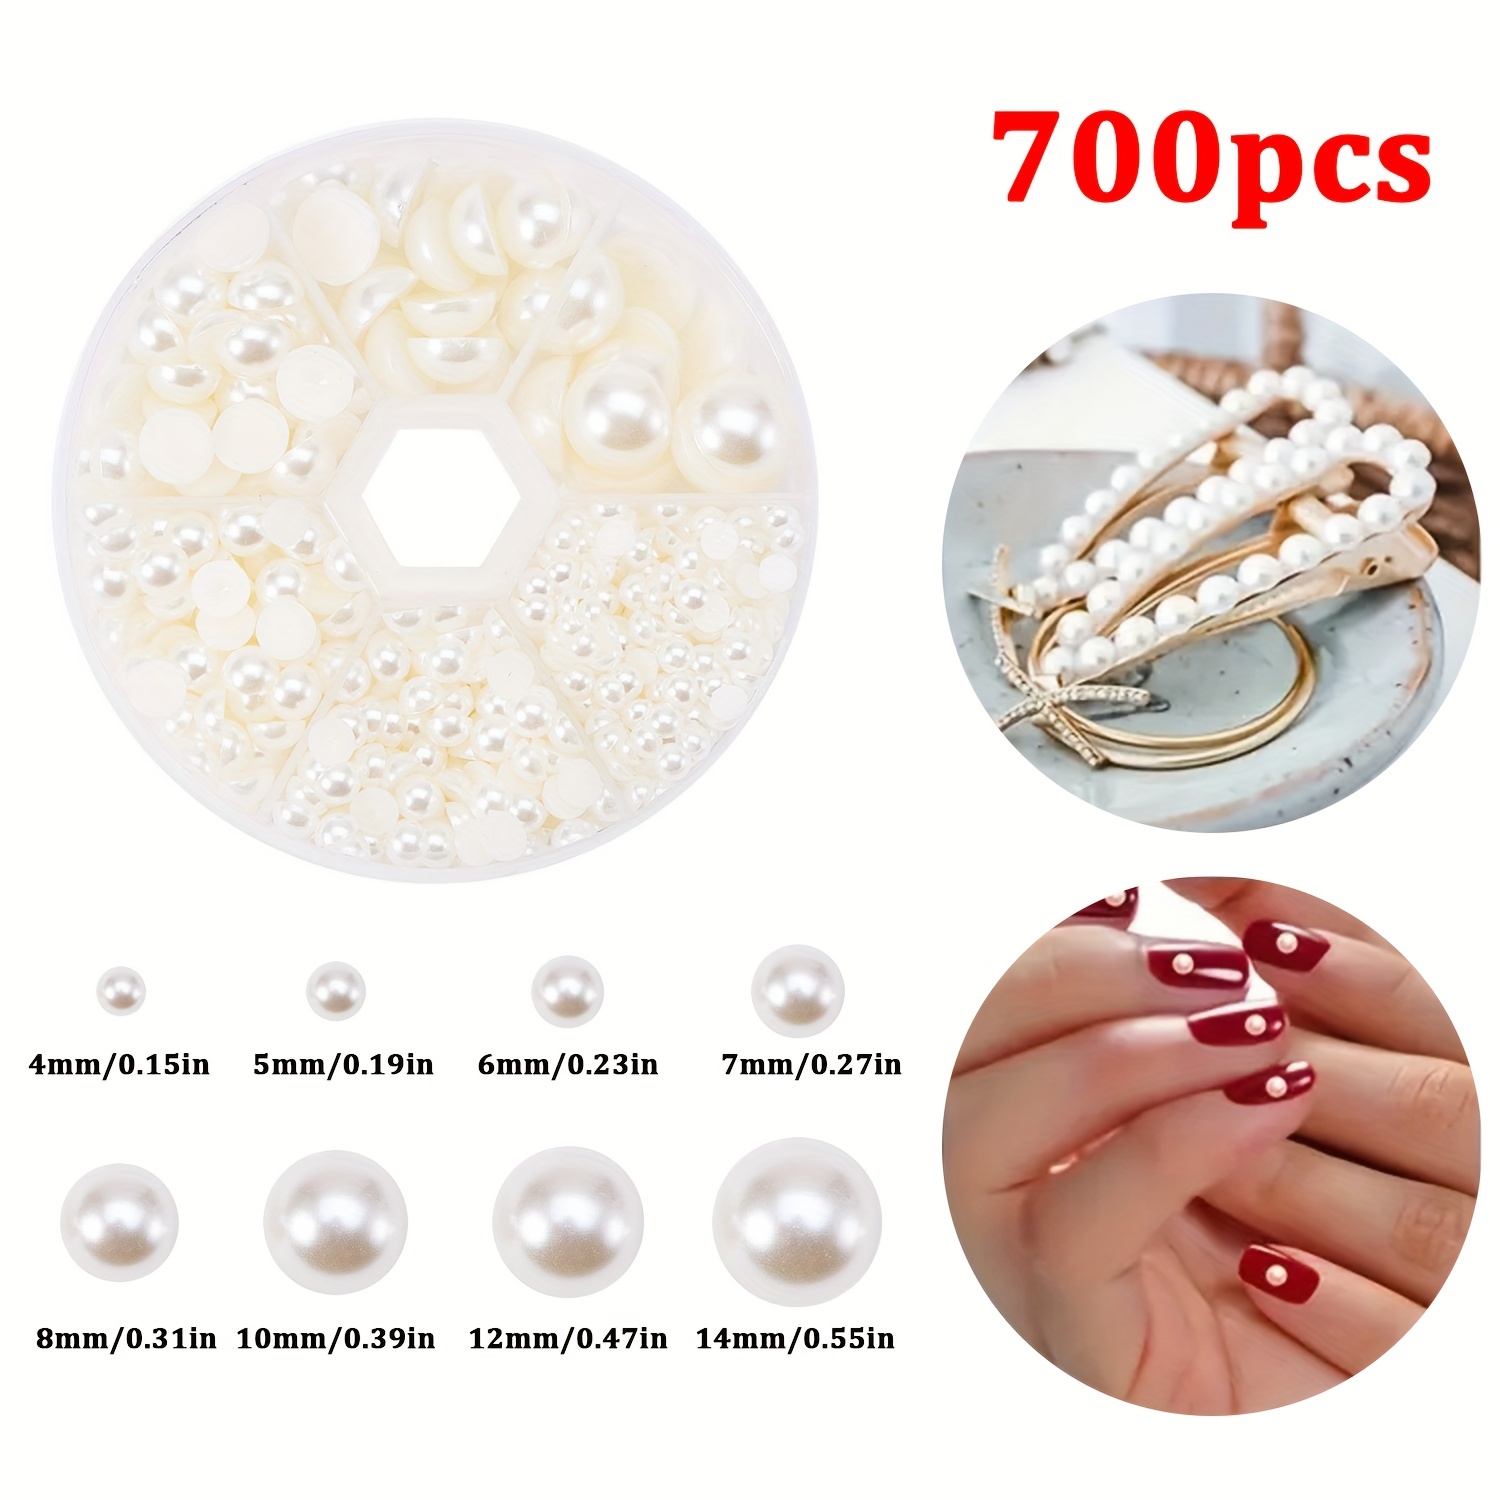 400 Assorted Size & Color Glass Round Pearl Beads a Mix of Small to Big  4mm, 6mm, 8mm, 10mm Loose Beads